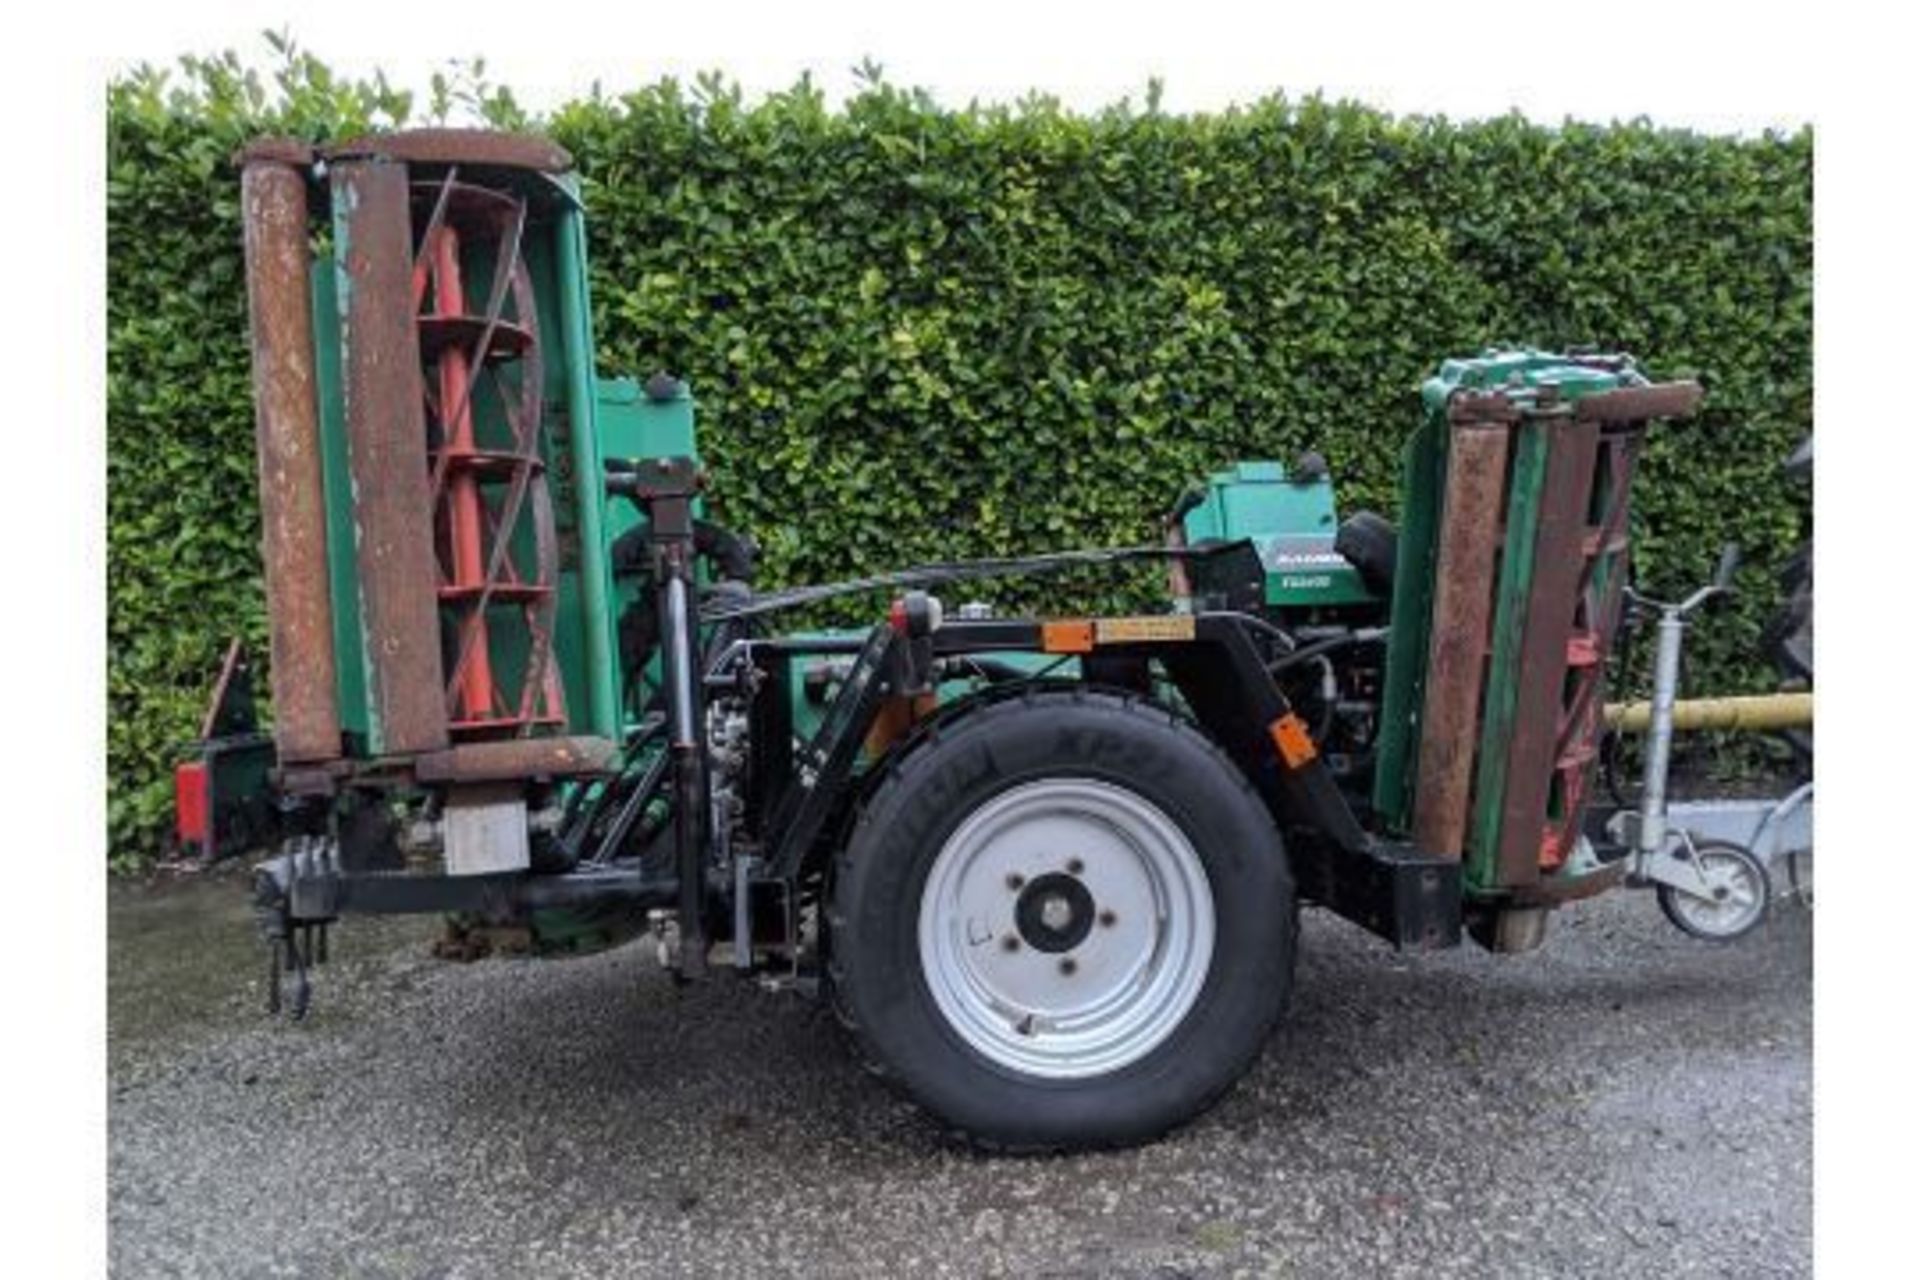 Ransomes TG3400 Tow Behind Gang Mower